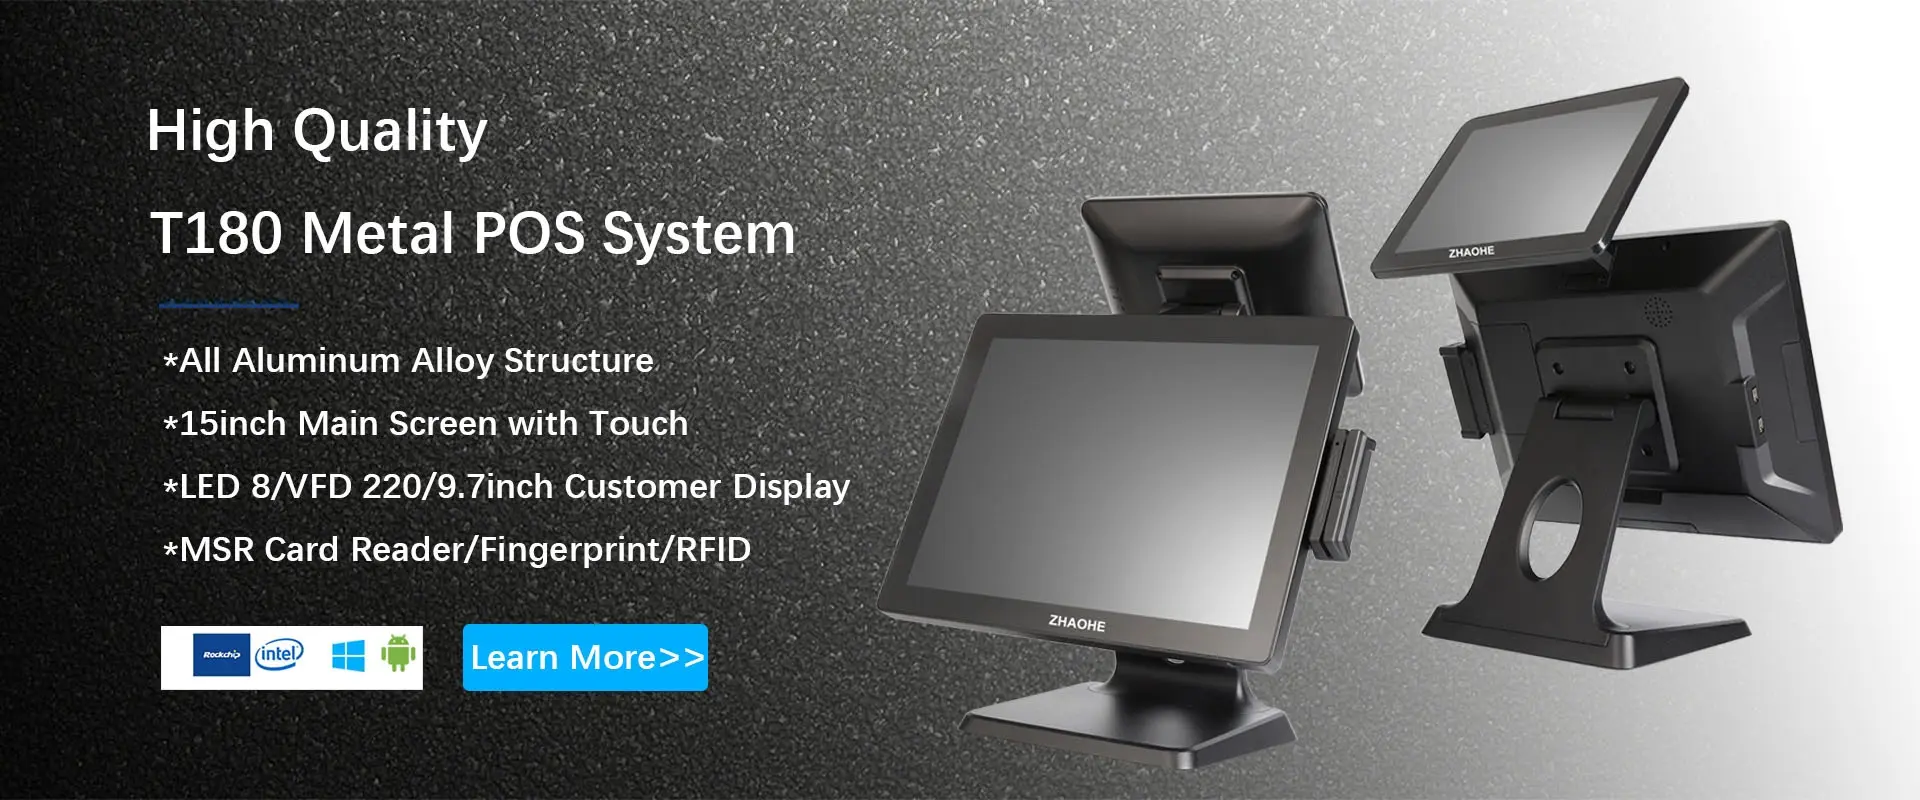 zhaohepos 15inch all aluminum pos system